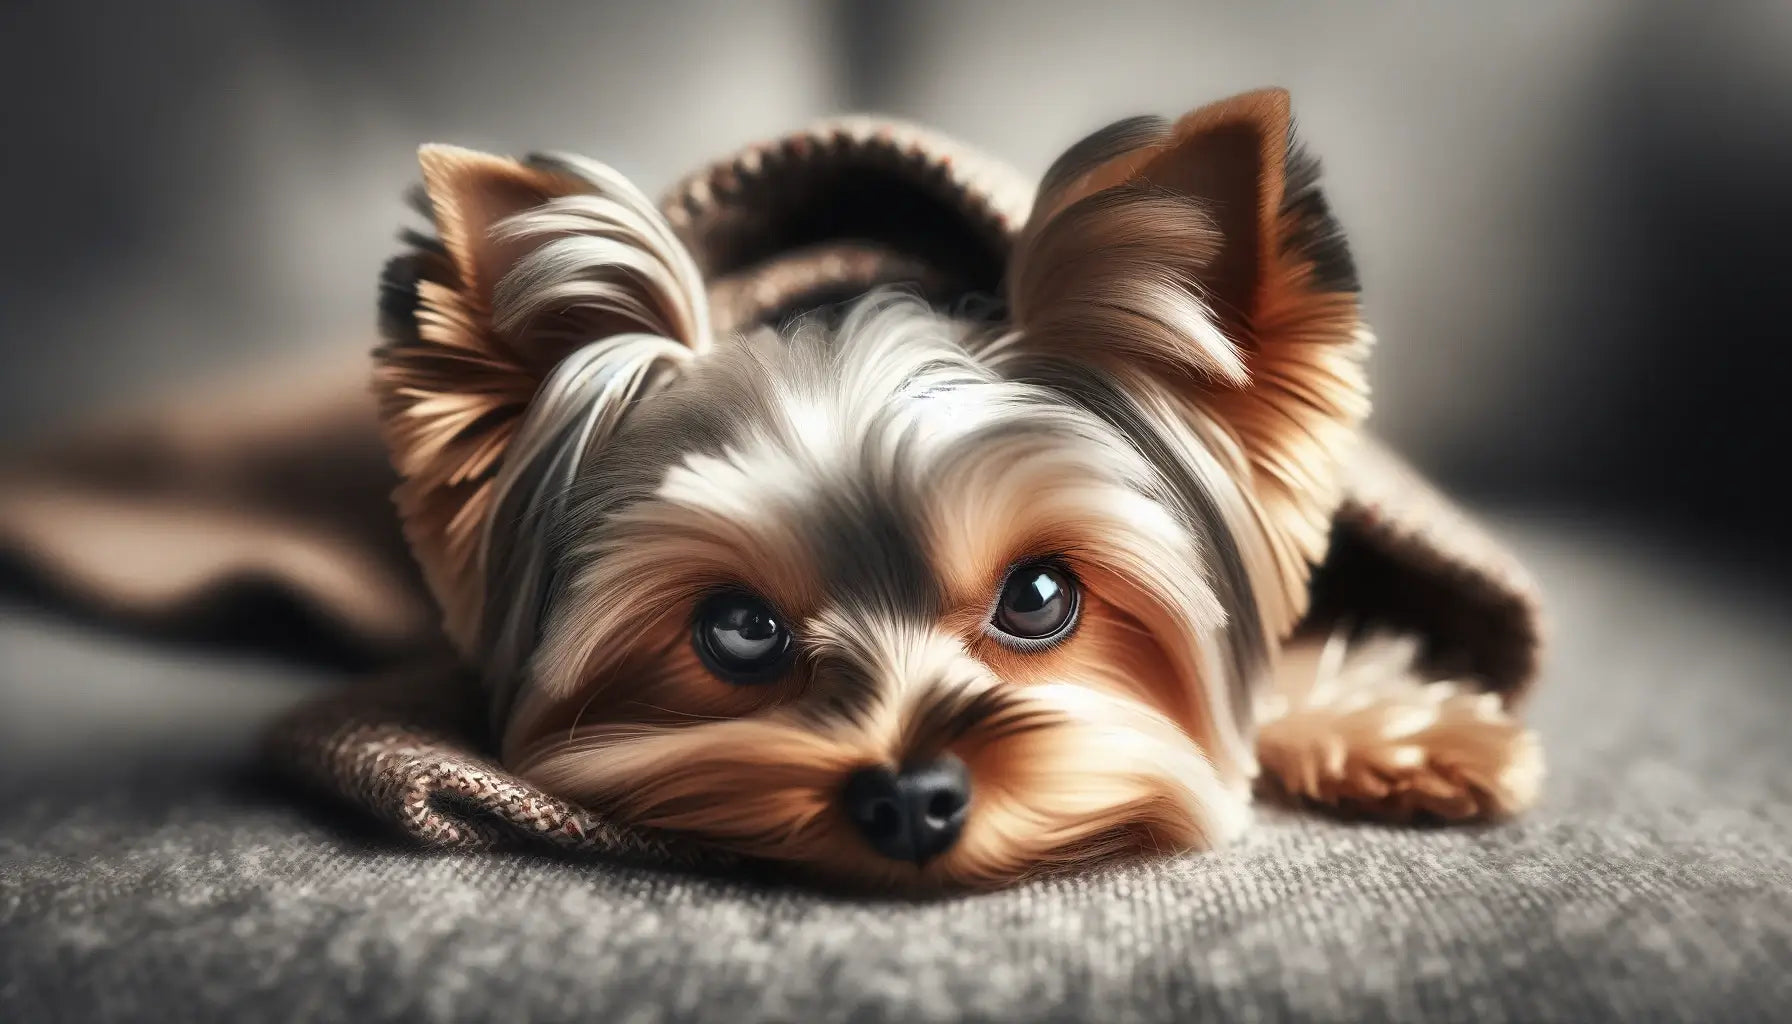 A Teacup Yorkie lies down peering out with a gentle gaze.